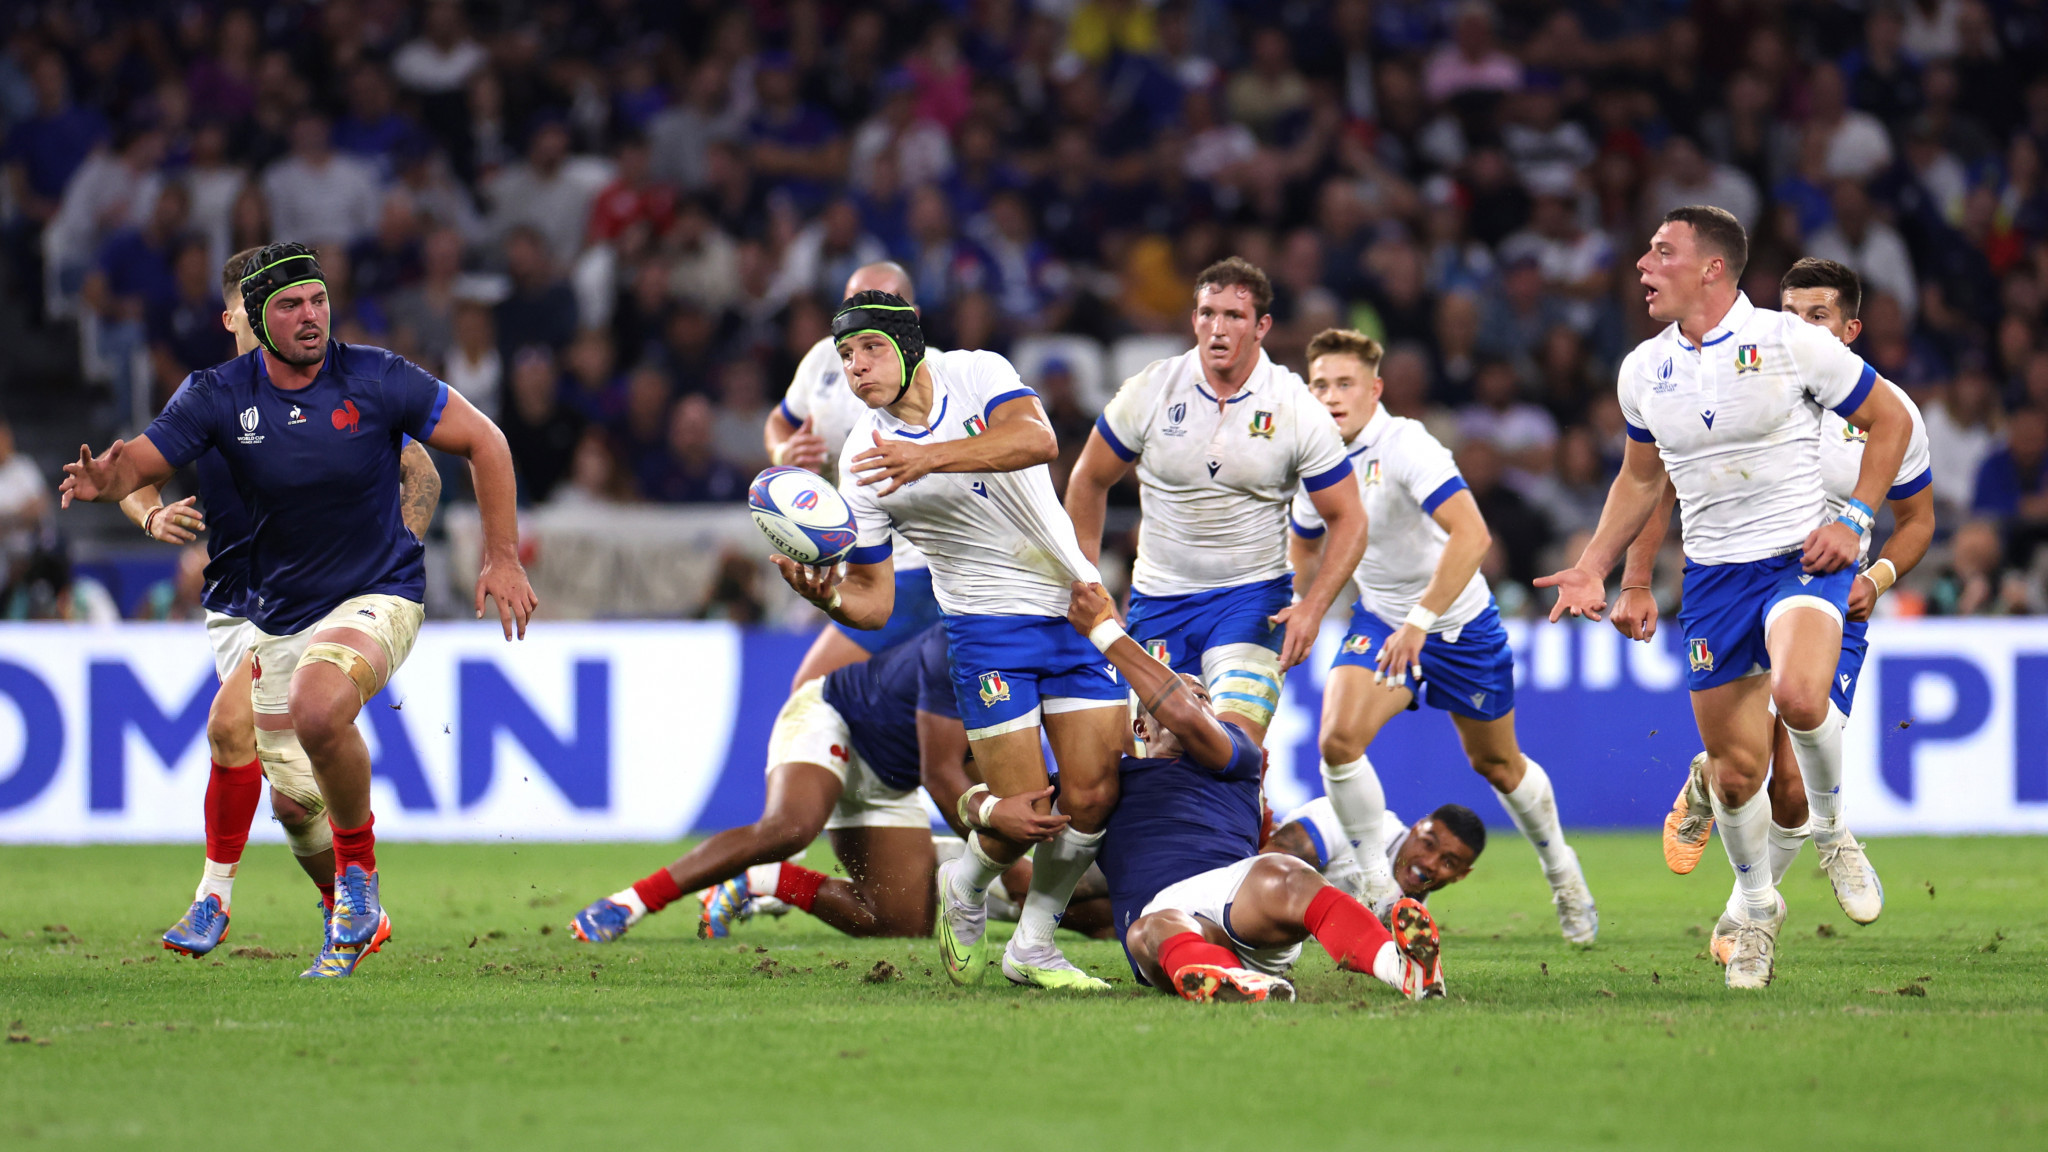 It was another heavy defeat for Italy against the hosts, a week after they conceded 96 points against New Zealand ©Getty Images